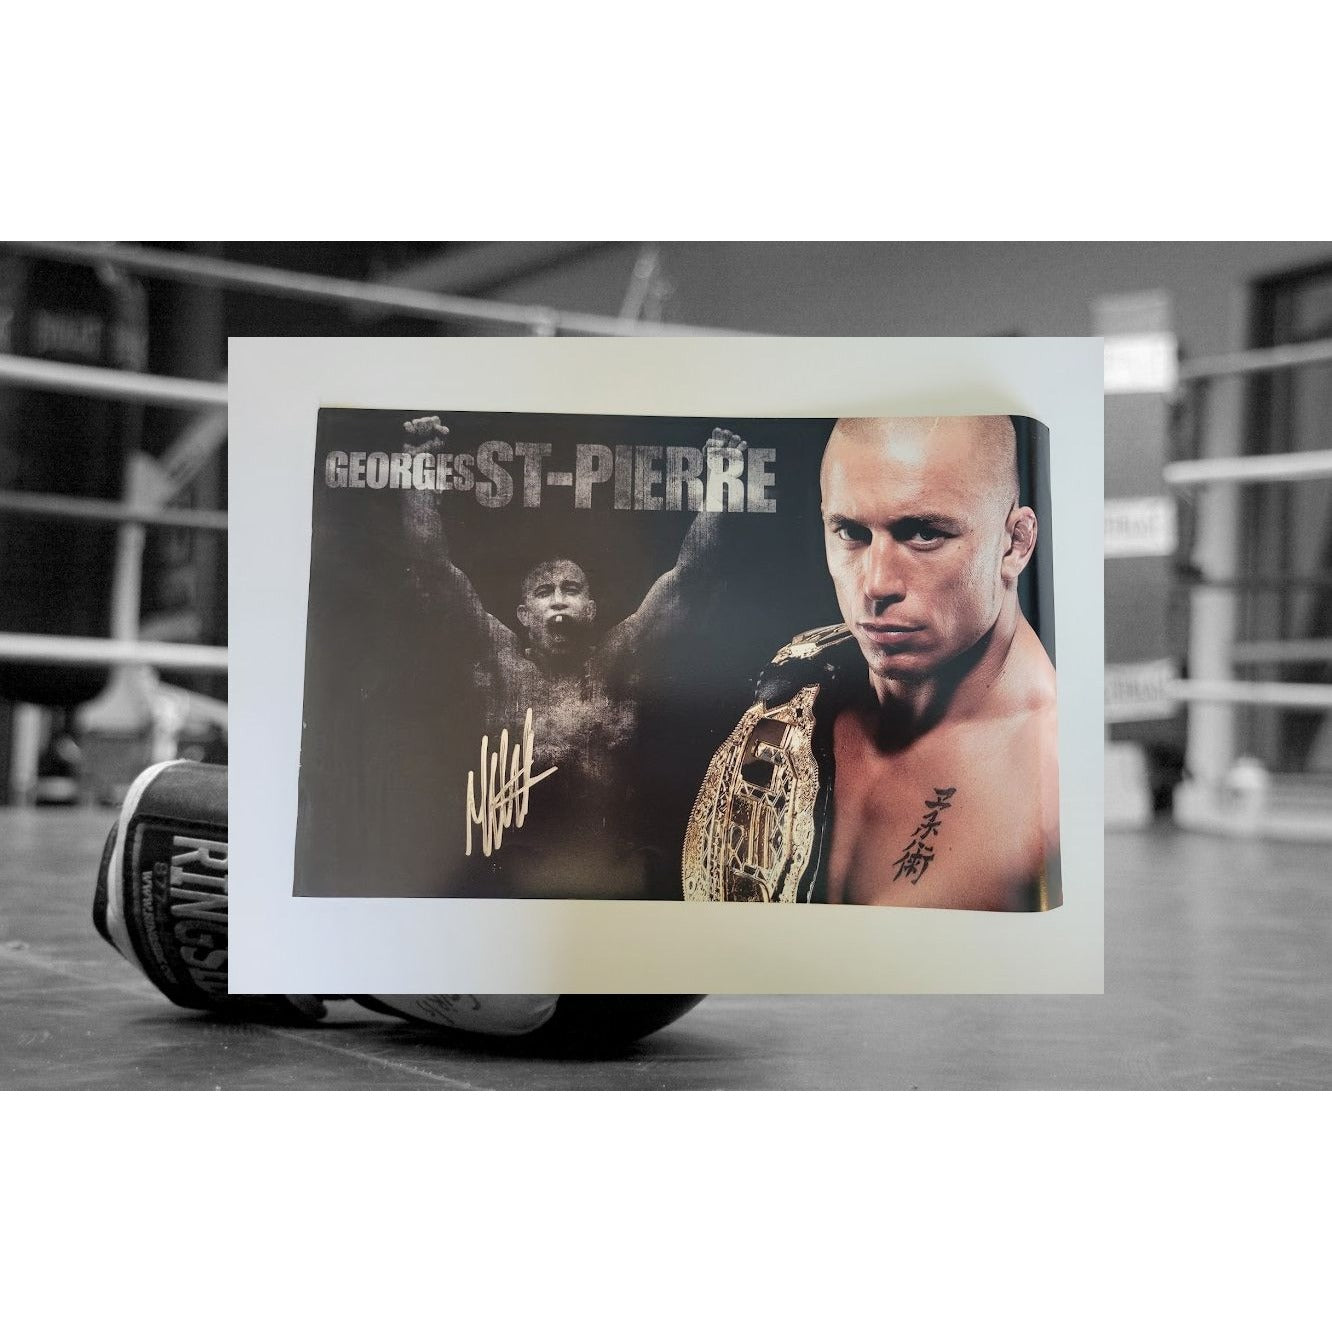 George St-Pierre 8 x 10 photo signed